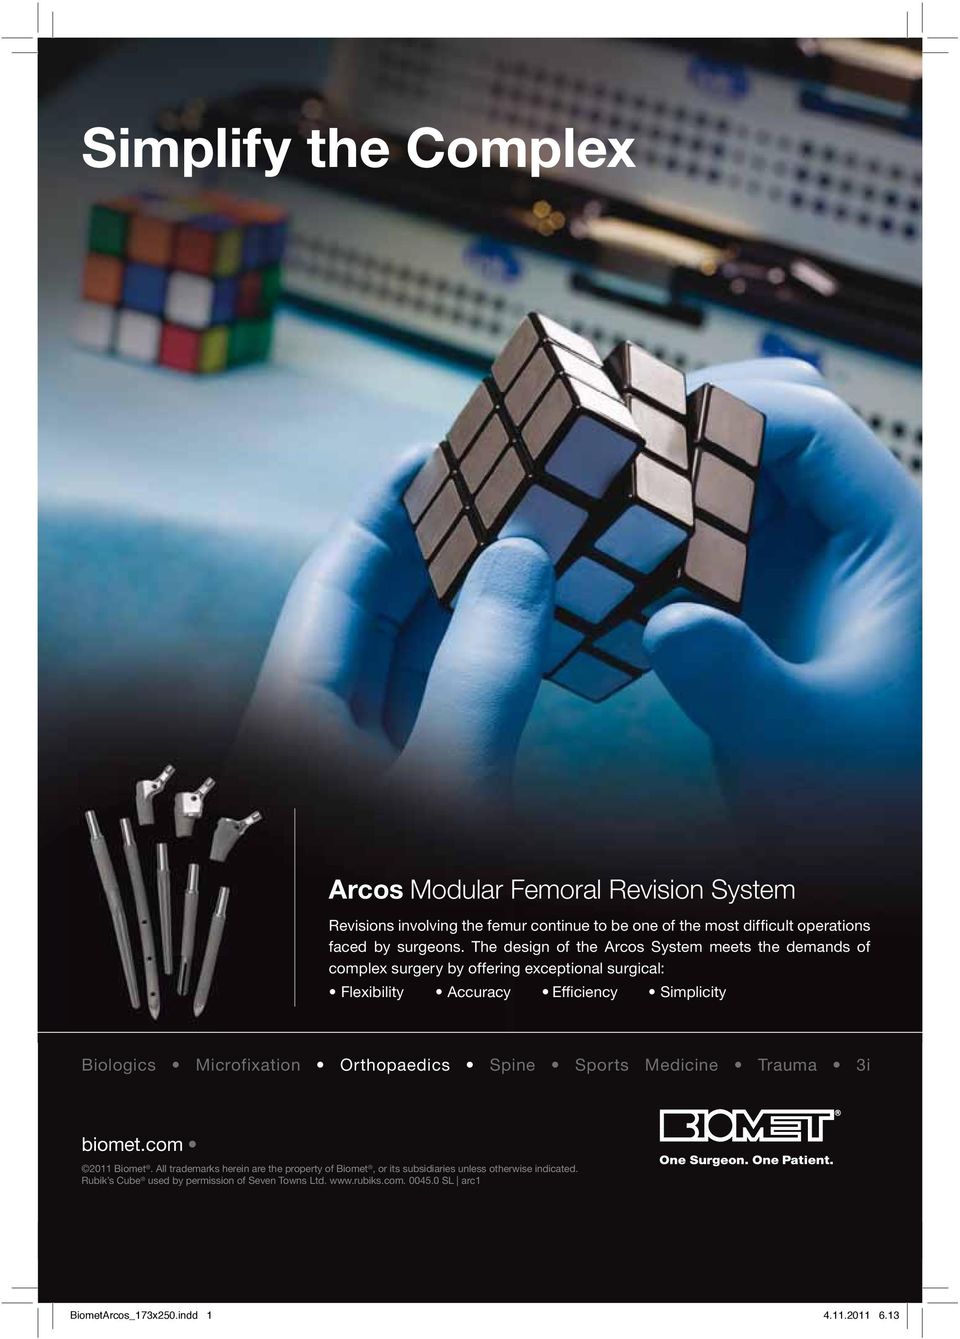 The design of the Arcos System meets the demands of complex surgery by offering exceptional surgical: biomet.com 2011 Biomet.